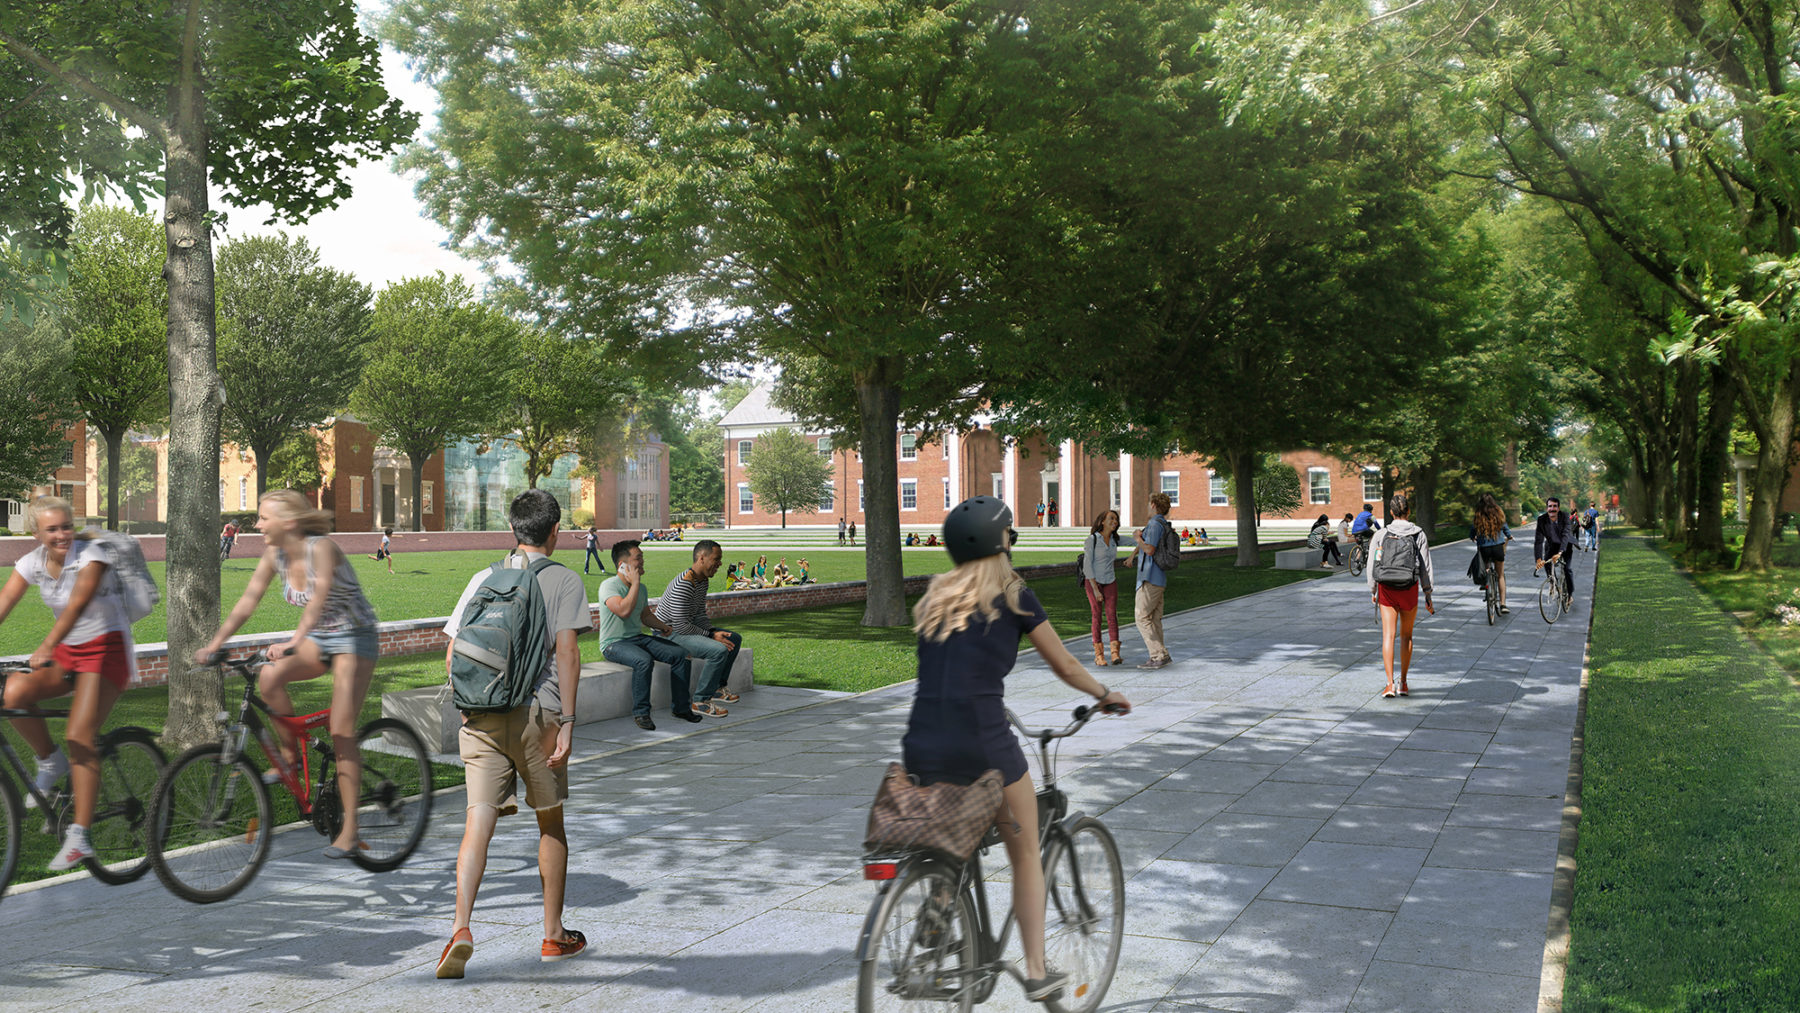 rendering of students walking and biking on path